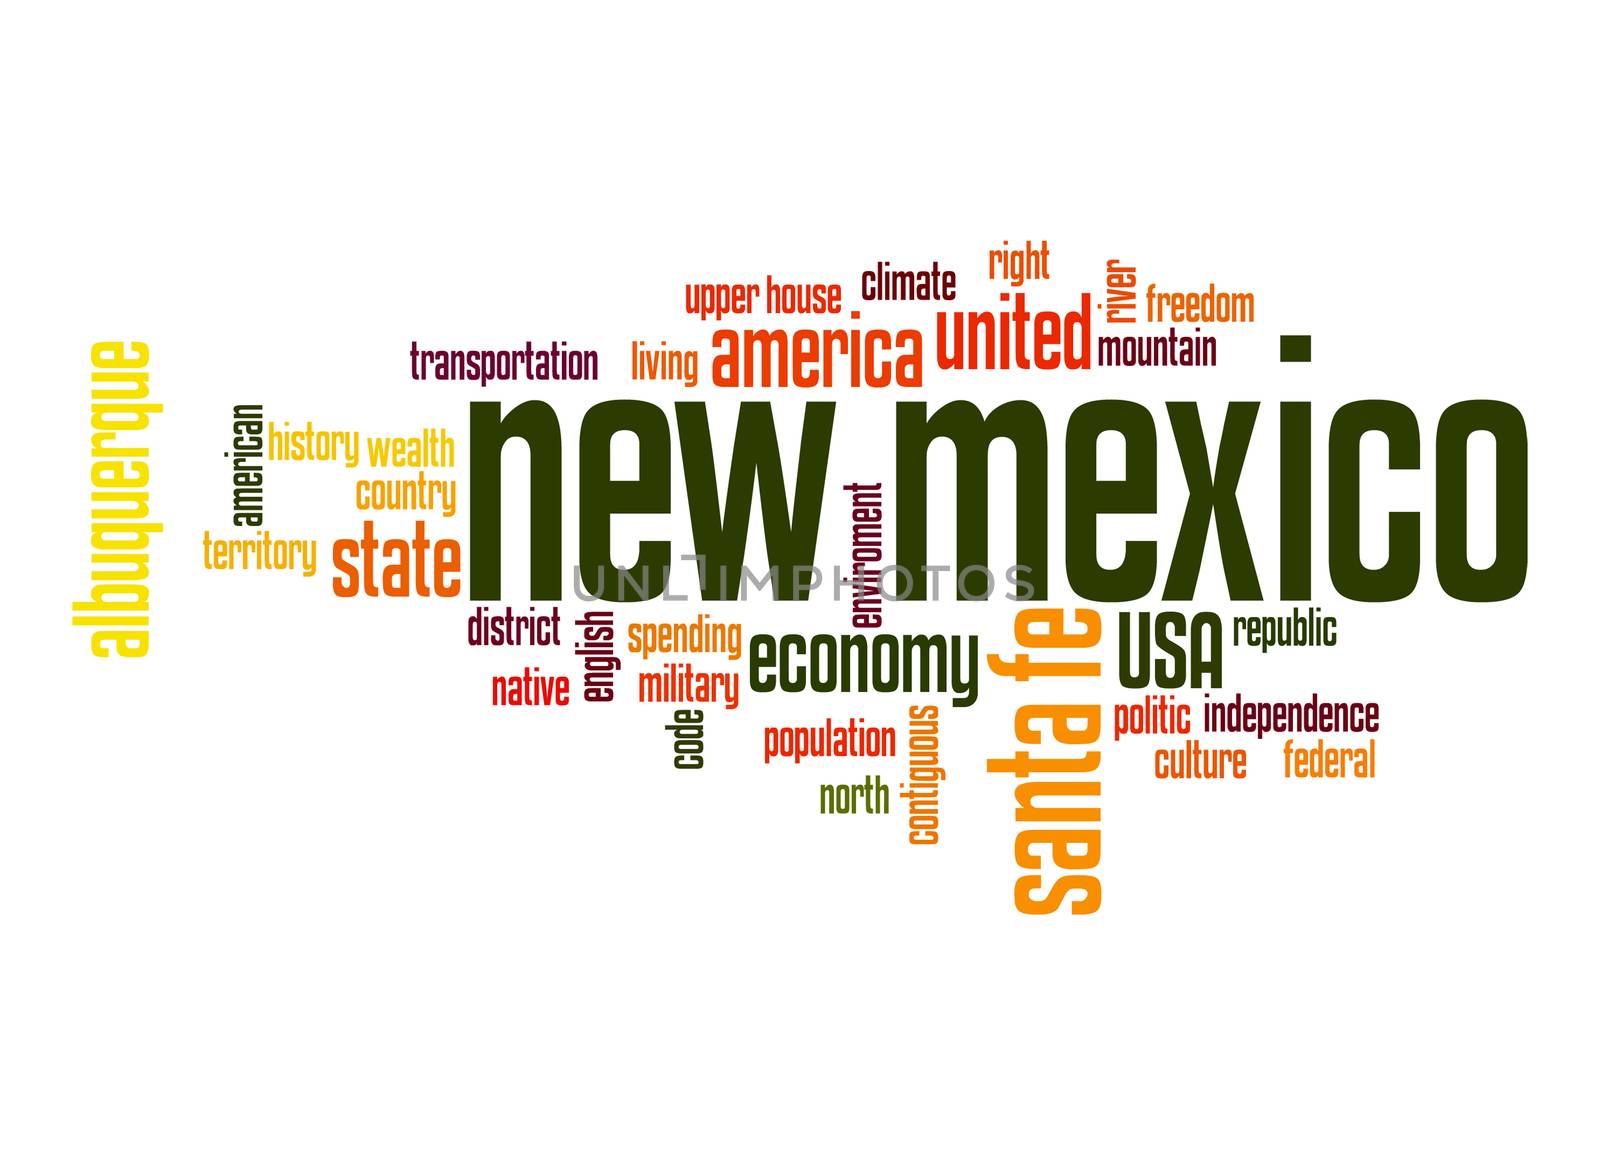 New Mexico word cloud